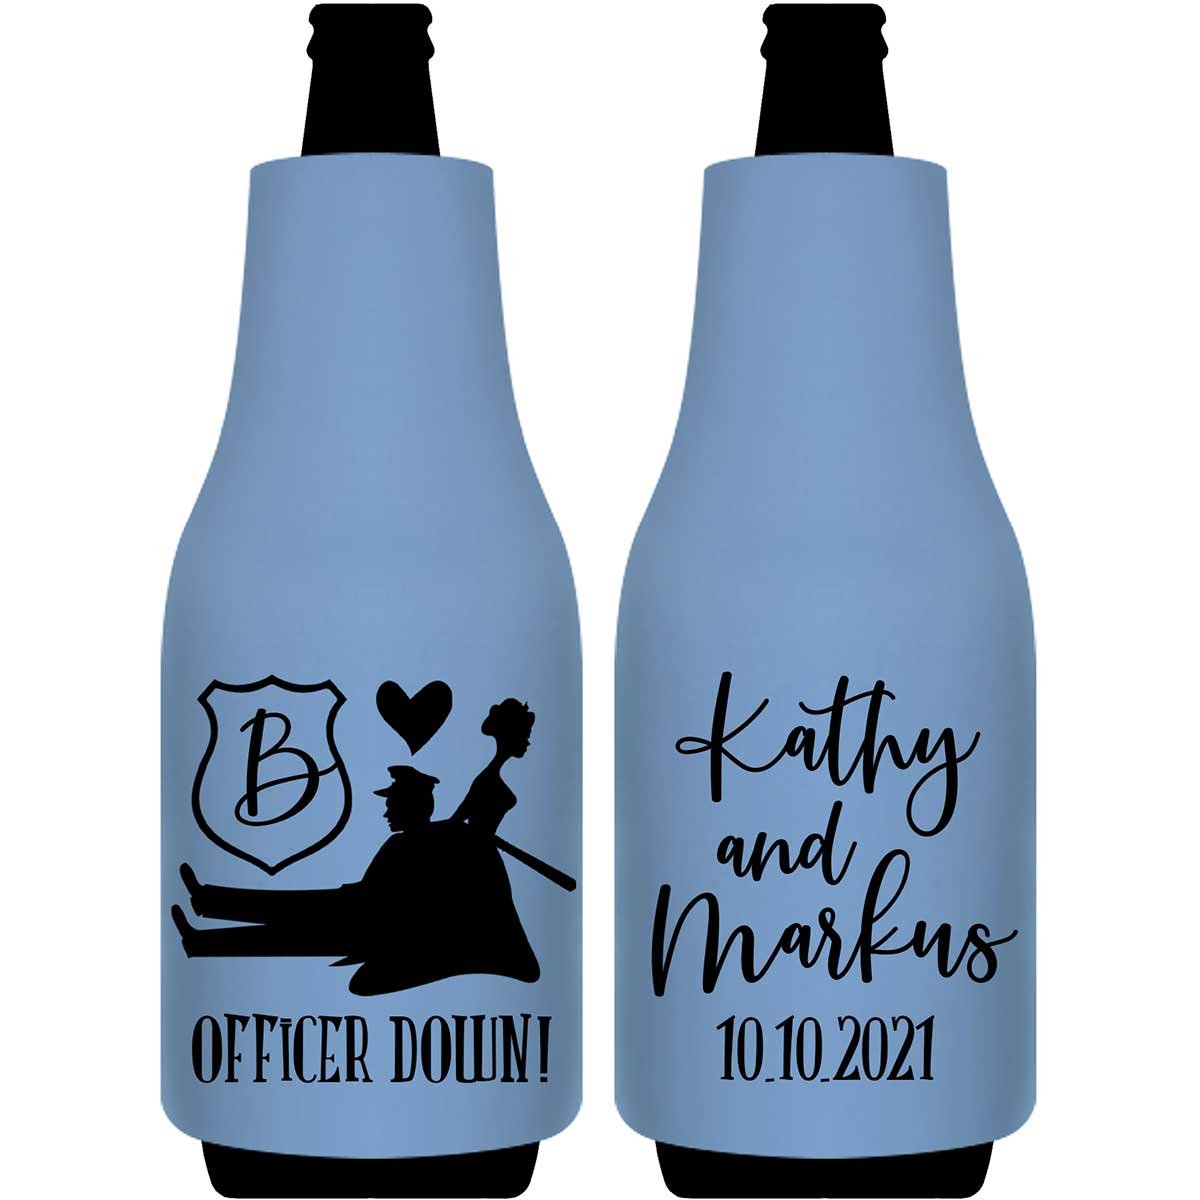 Officer Down 1A Policeman Wedding Foldable Bottle Sleeve Koozies Wedding Gifts for Guests